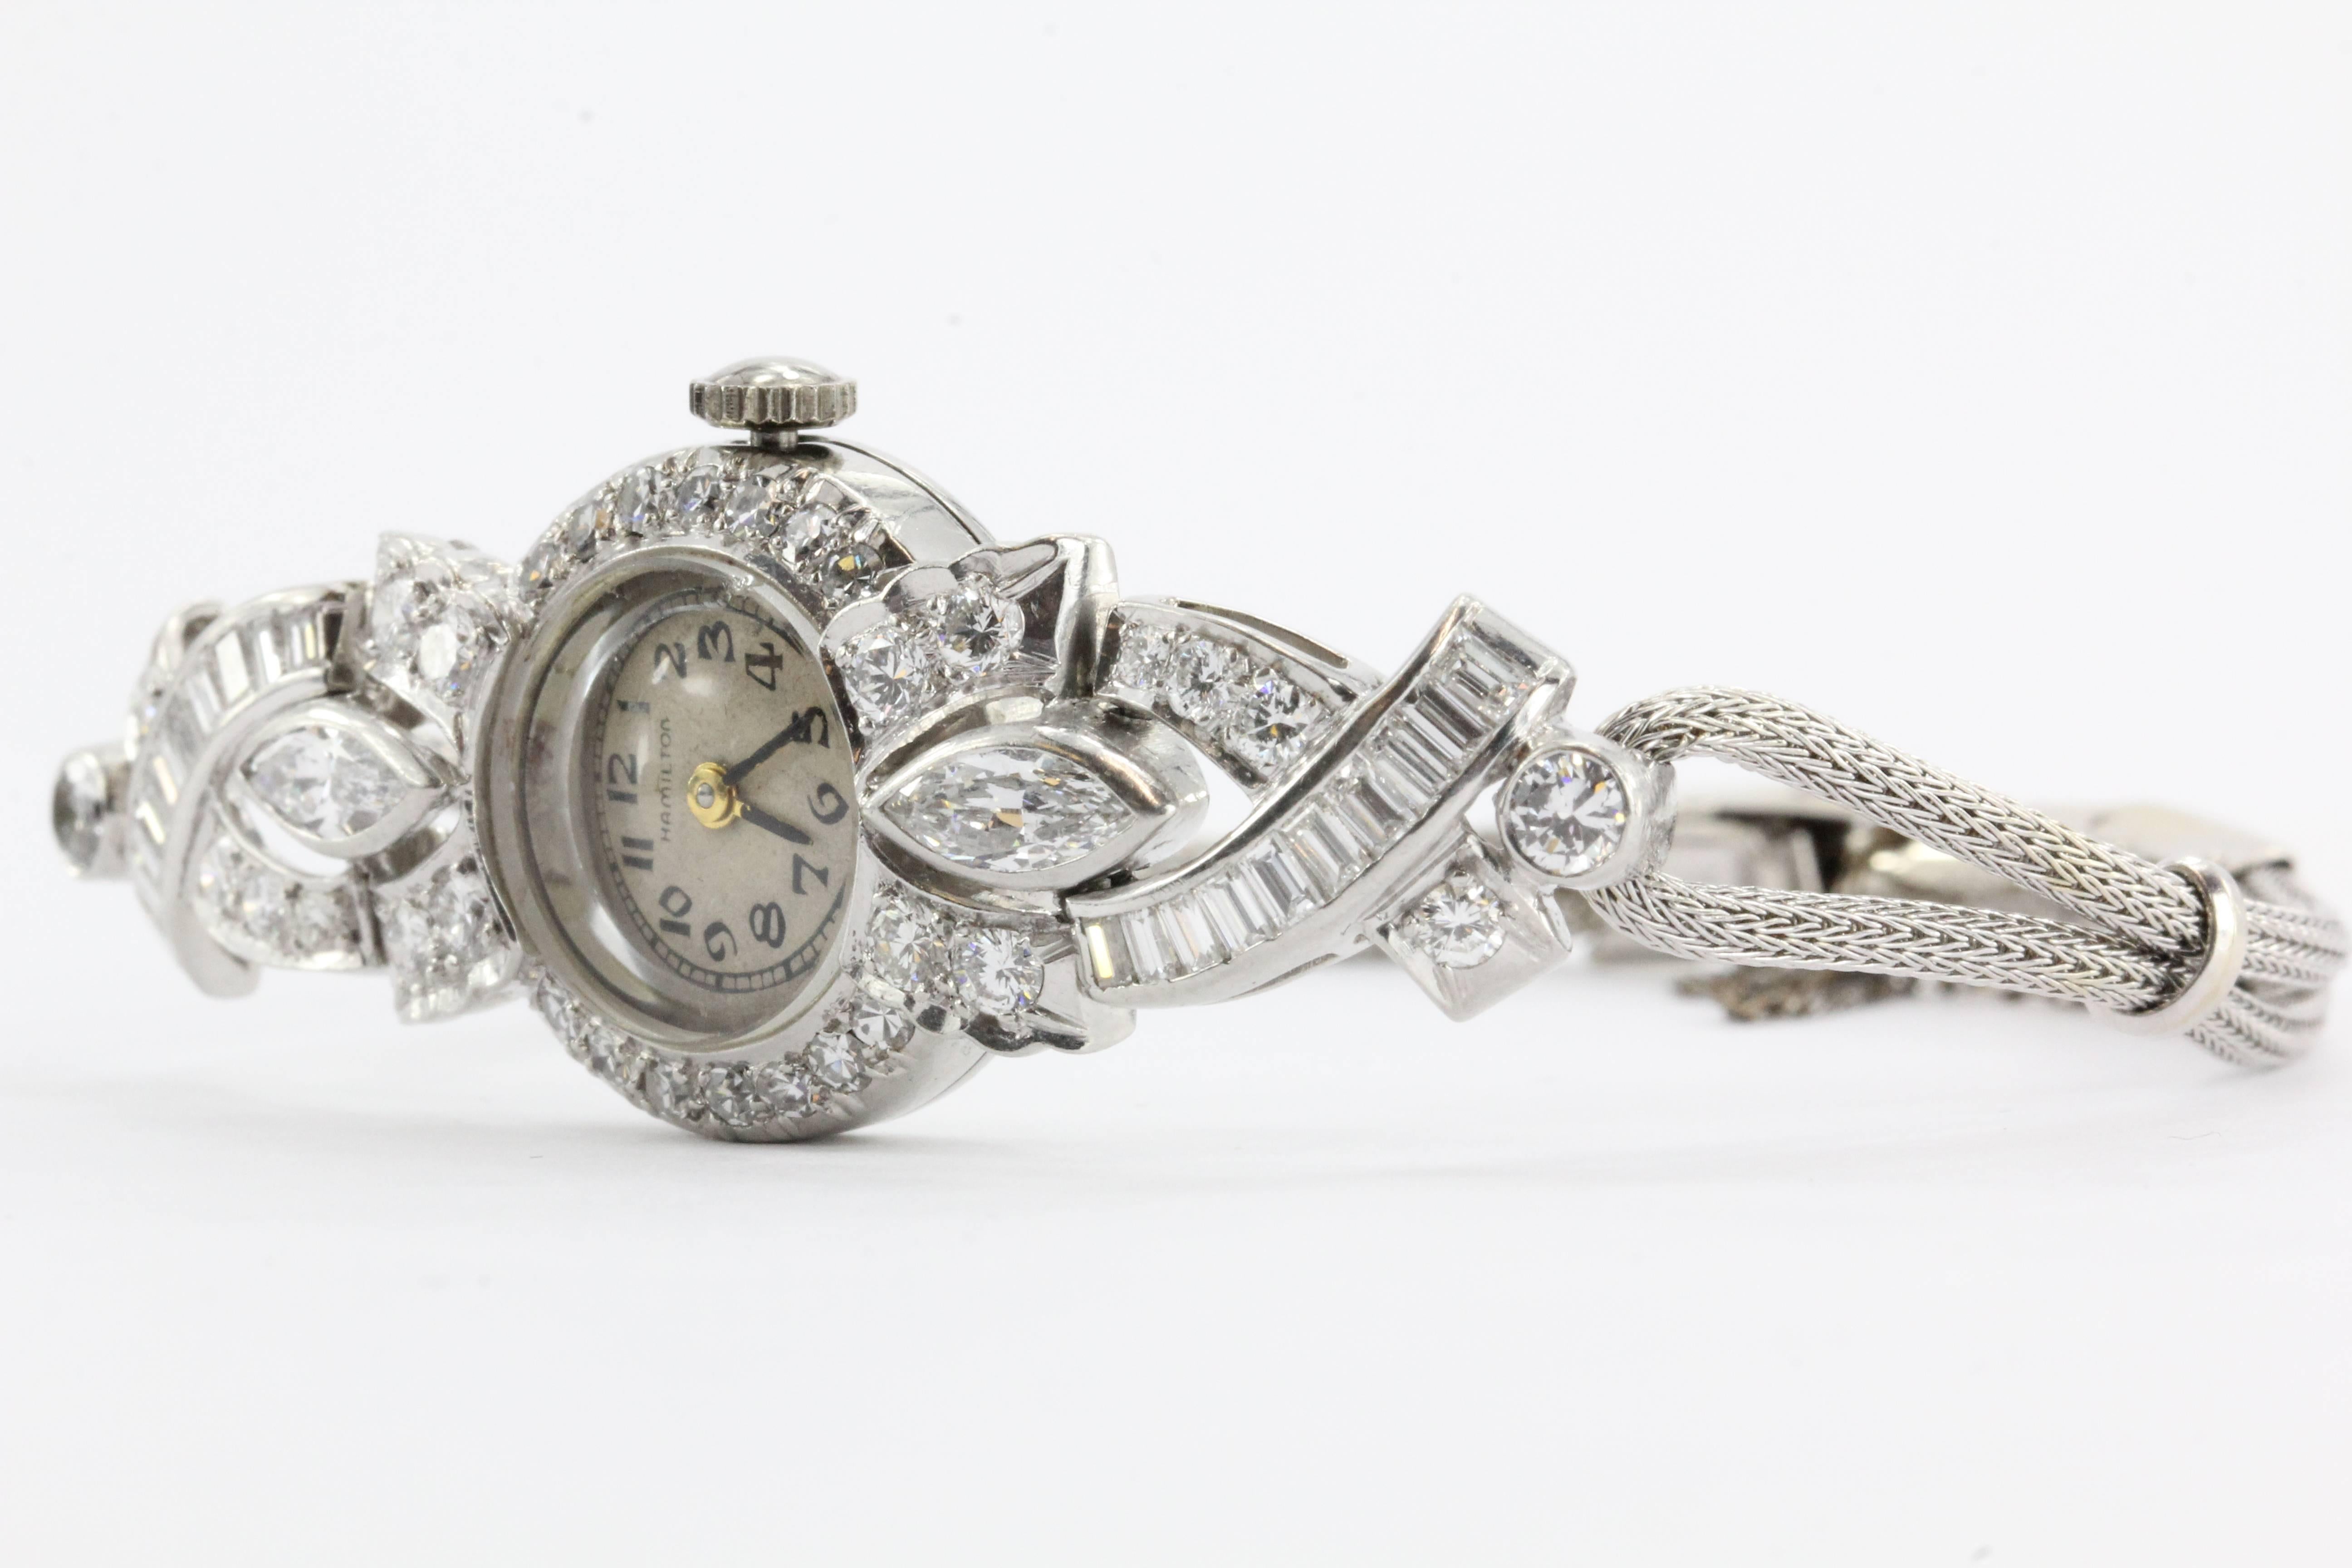 An incredible rare Art Deco Diamond Luxury Watch. The watch is in excellent estate condition, it runs well and is ready to wear. The battery has been very recently replaced. As an antique however it should be tuned by a professional jeweler for